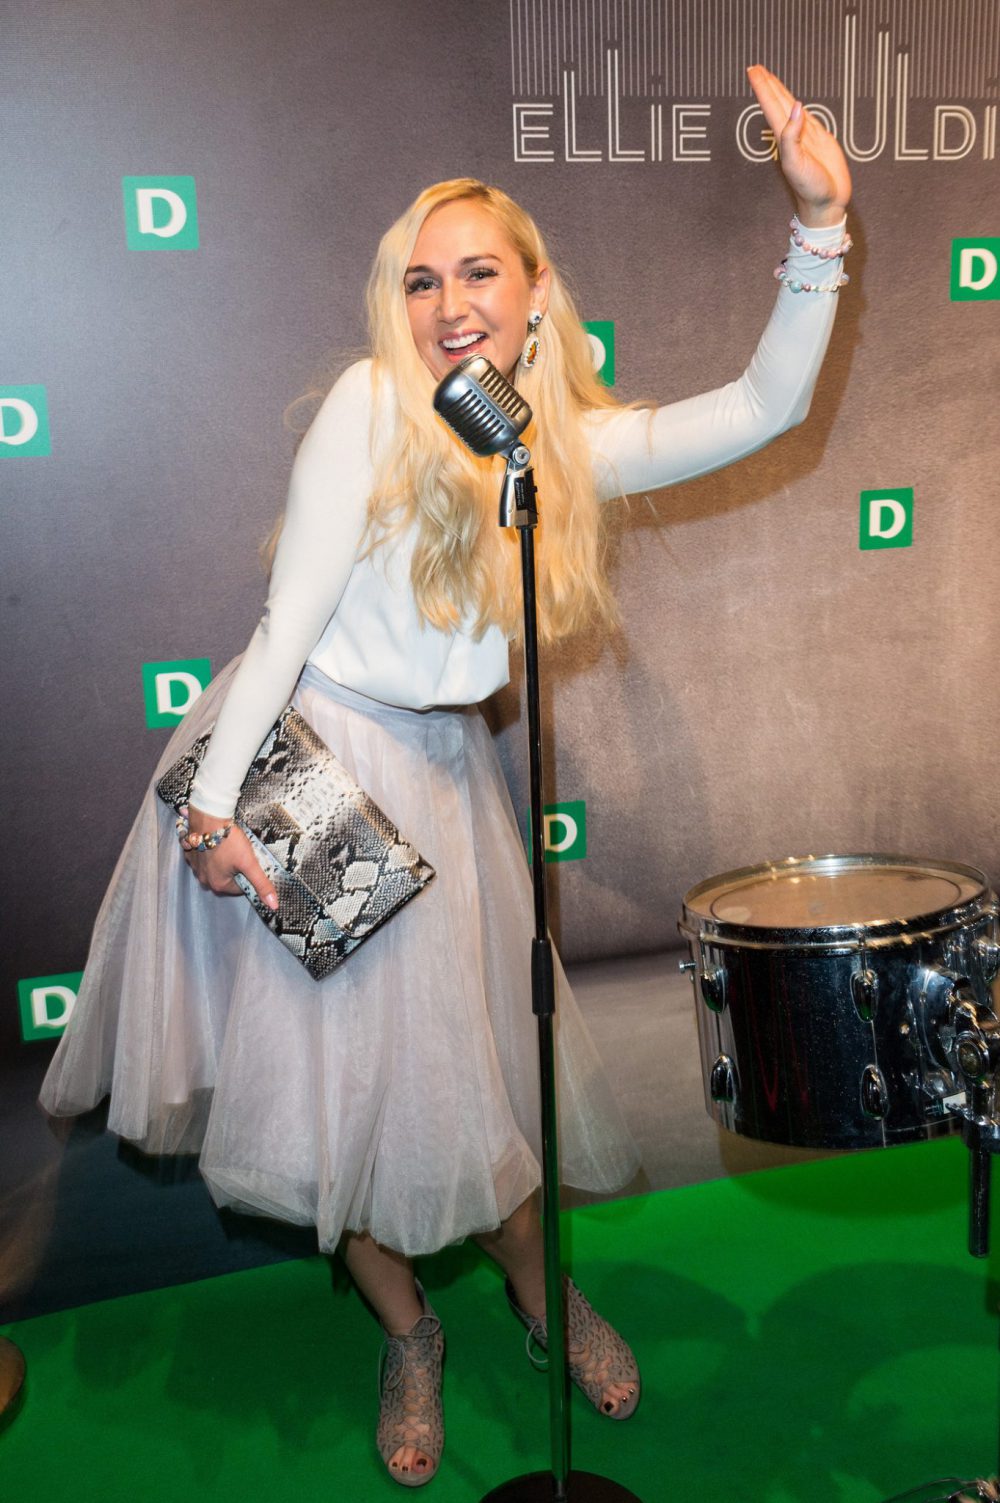 Indre Stonkuviene at the launch of Deichmann Ellie Goulding Shoe Range Featuring: Indre Stonkuviene Where: London, London When: 28 Feb 2017 Credit: WENN